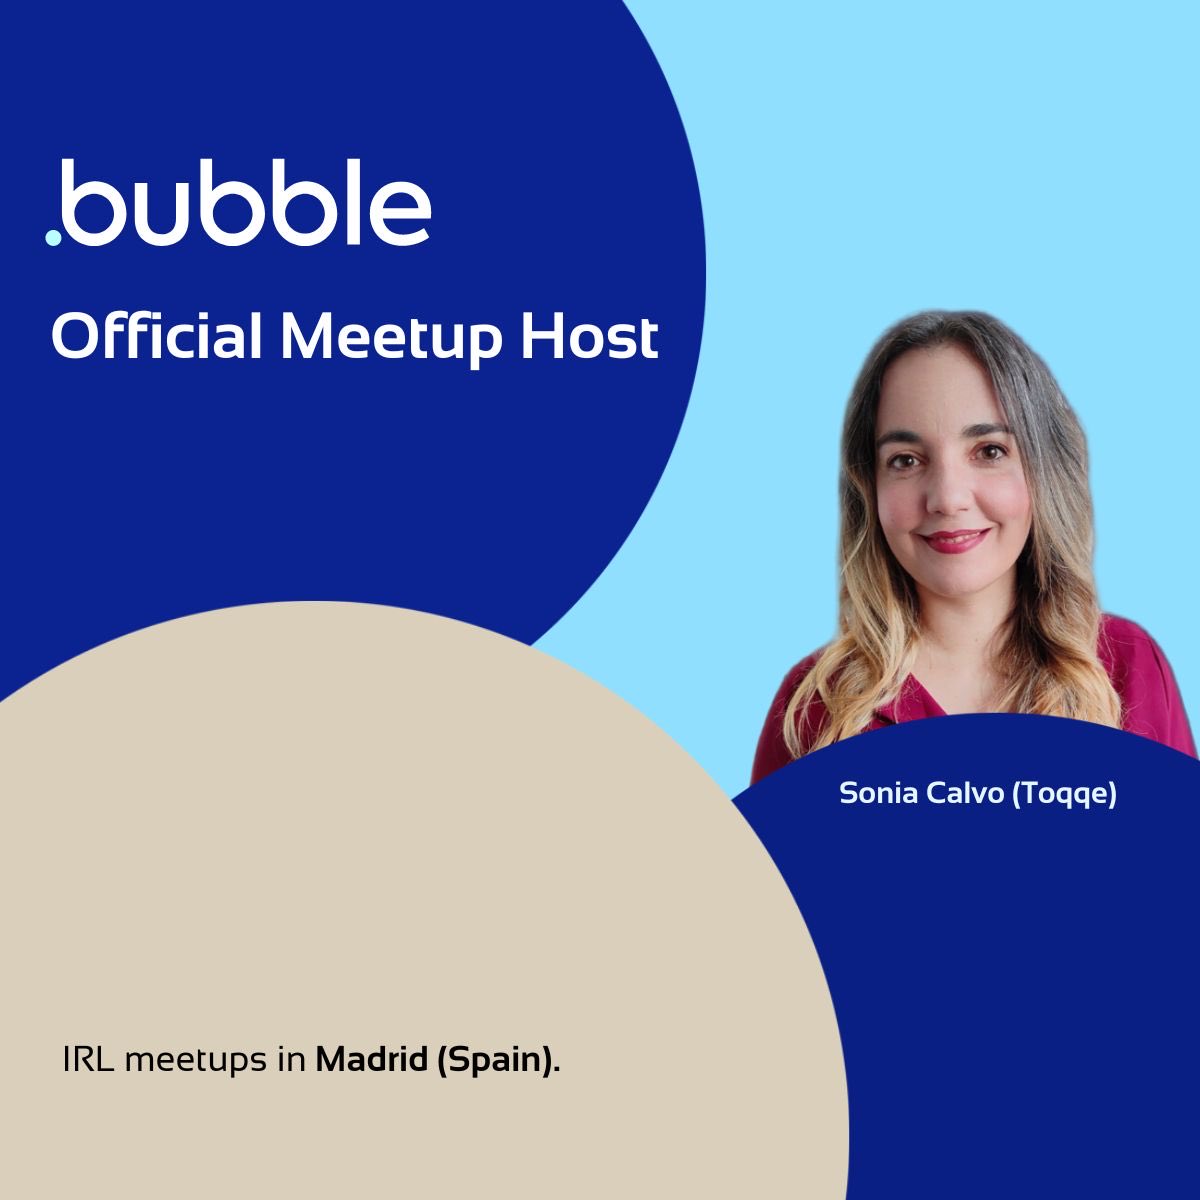 So glad to announce that I become a ⁦@bubble⁩ Official Meetup Host! #SaveTheDate for the kick-off event: it will be held on 21st March in #Madrid 🇪🇸 Come & meet other fellow Bubblers IRL! Save your spot now ➡ lu.ma/v2tvyaso